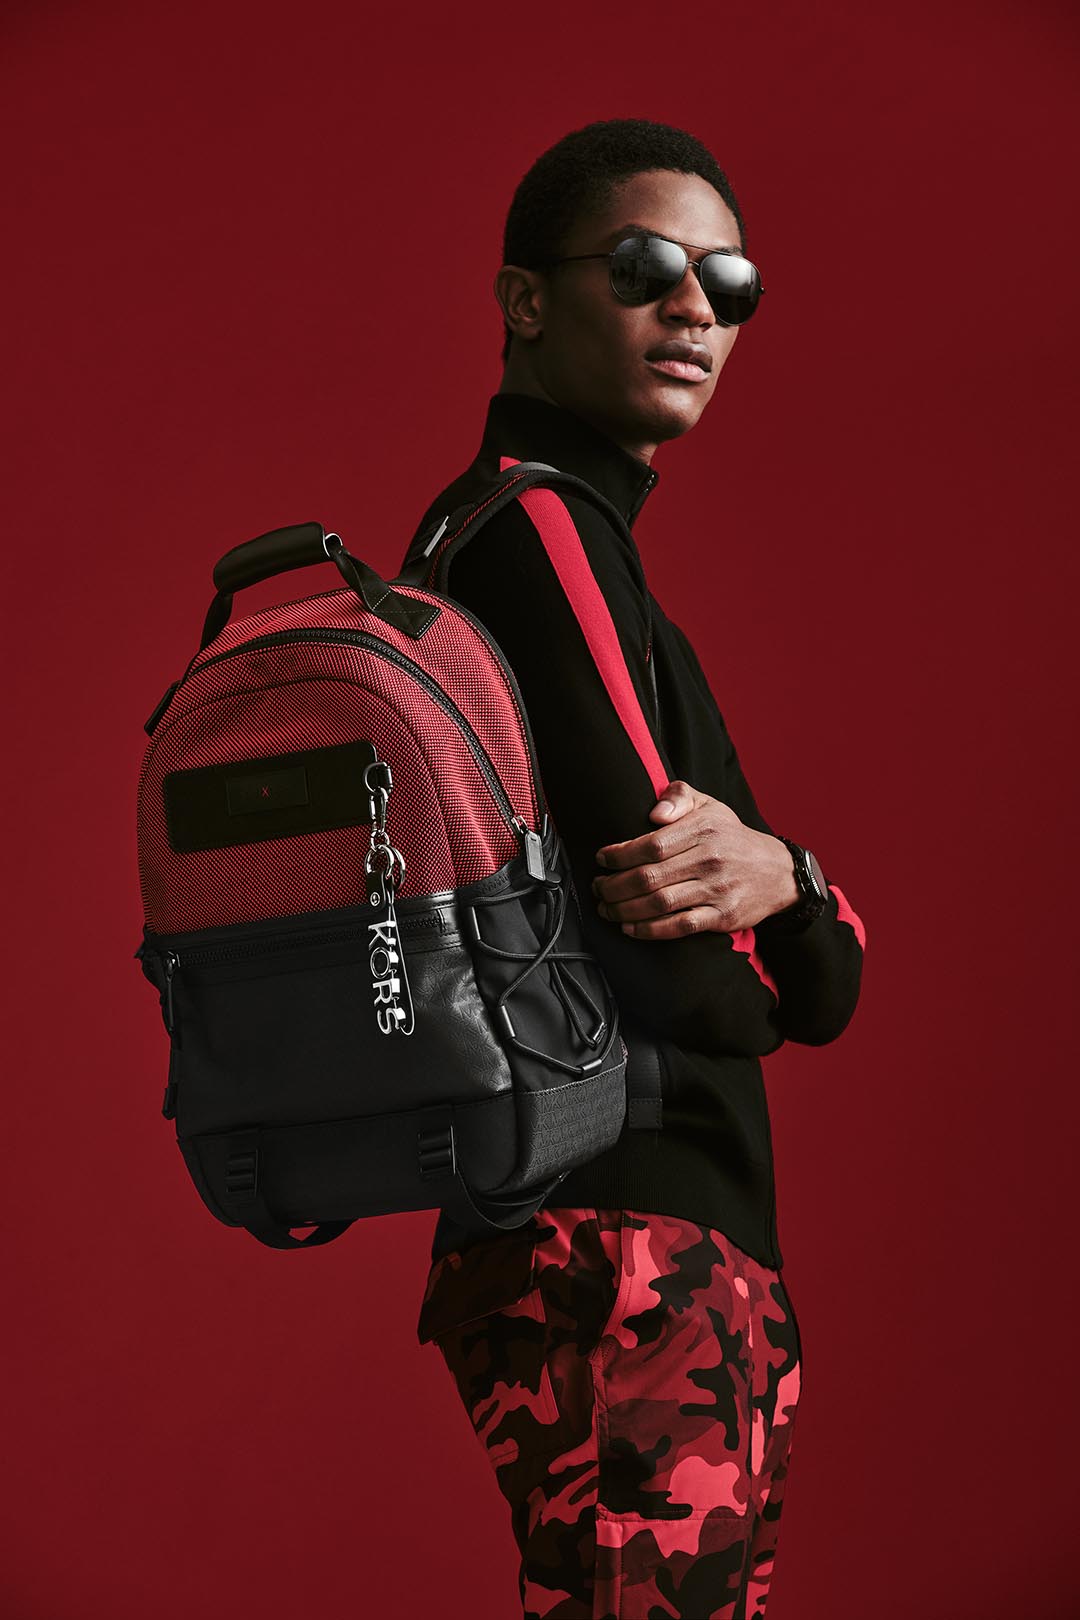 Michael Kors men's dives into the of sport-luxe | Middle East